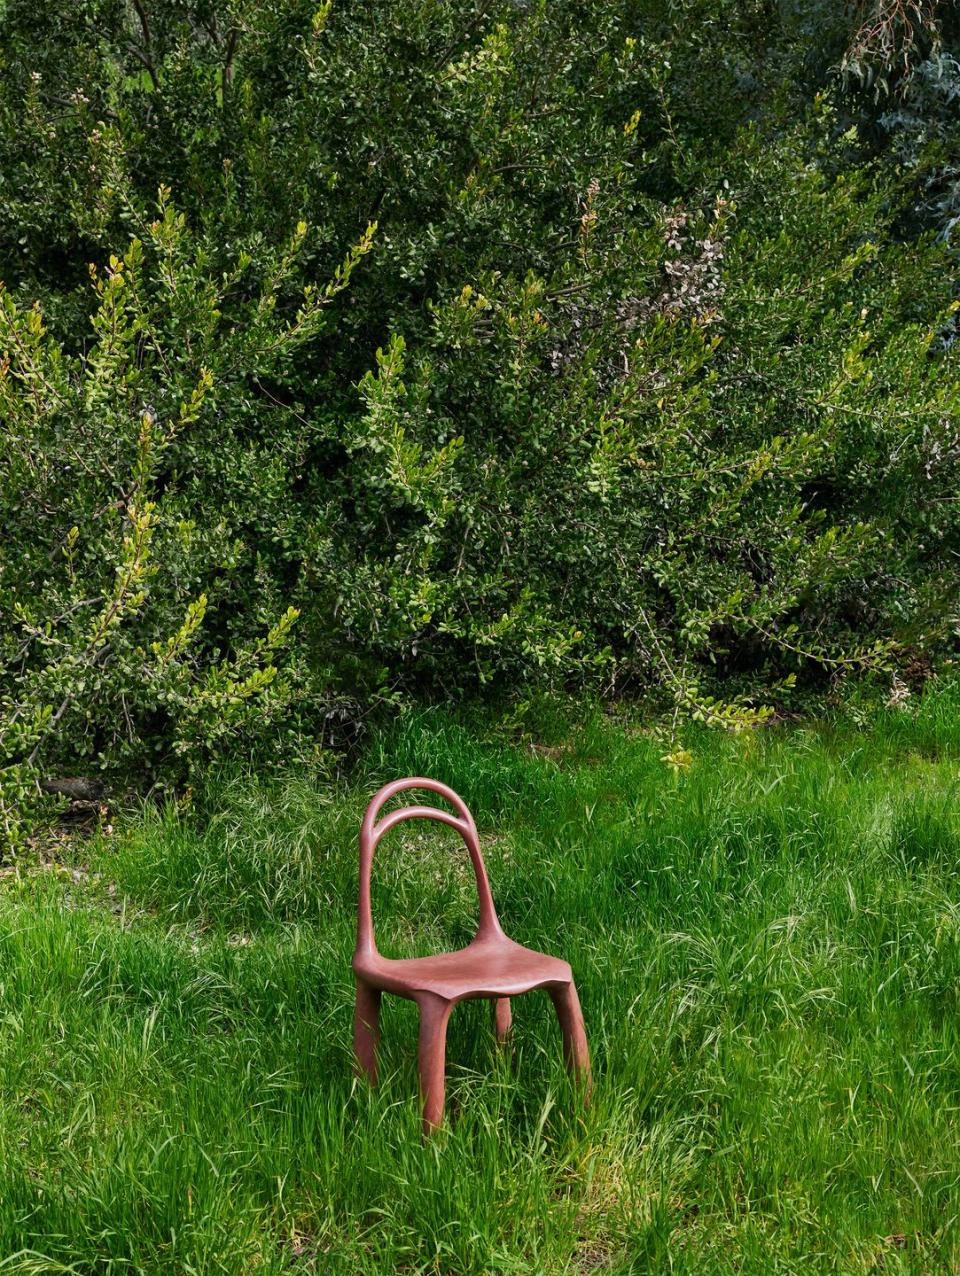 a chair in a grassy area